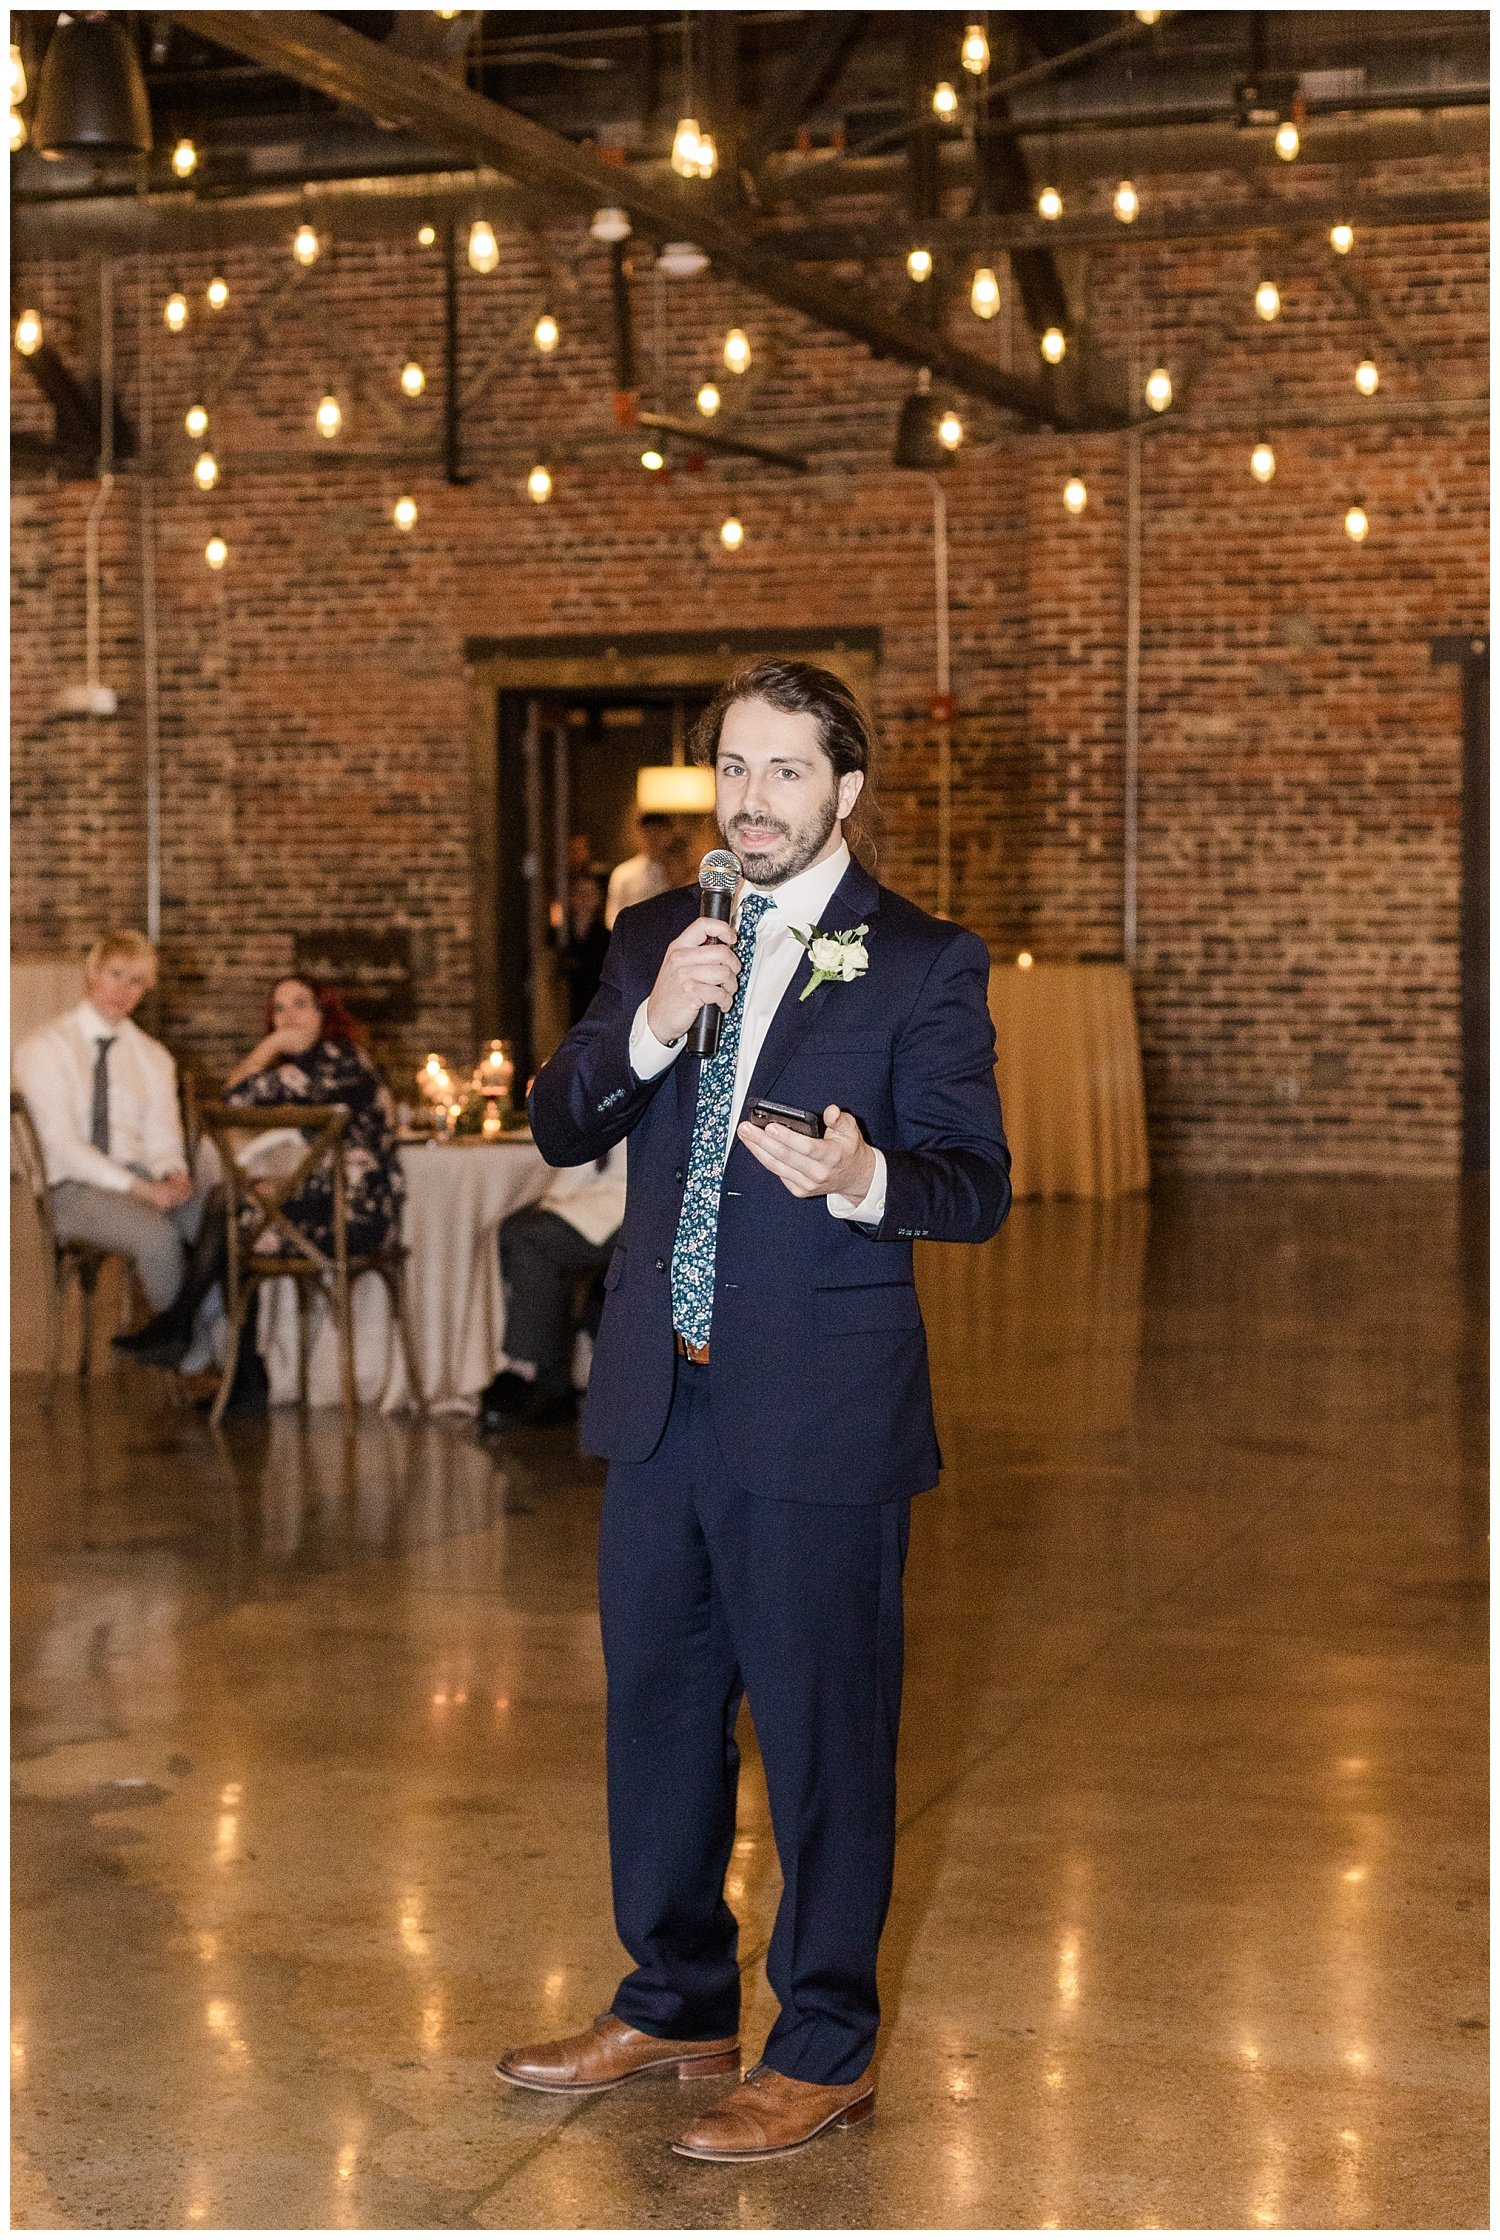 best man giving his toast at wedding reception